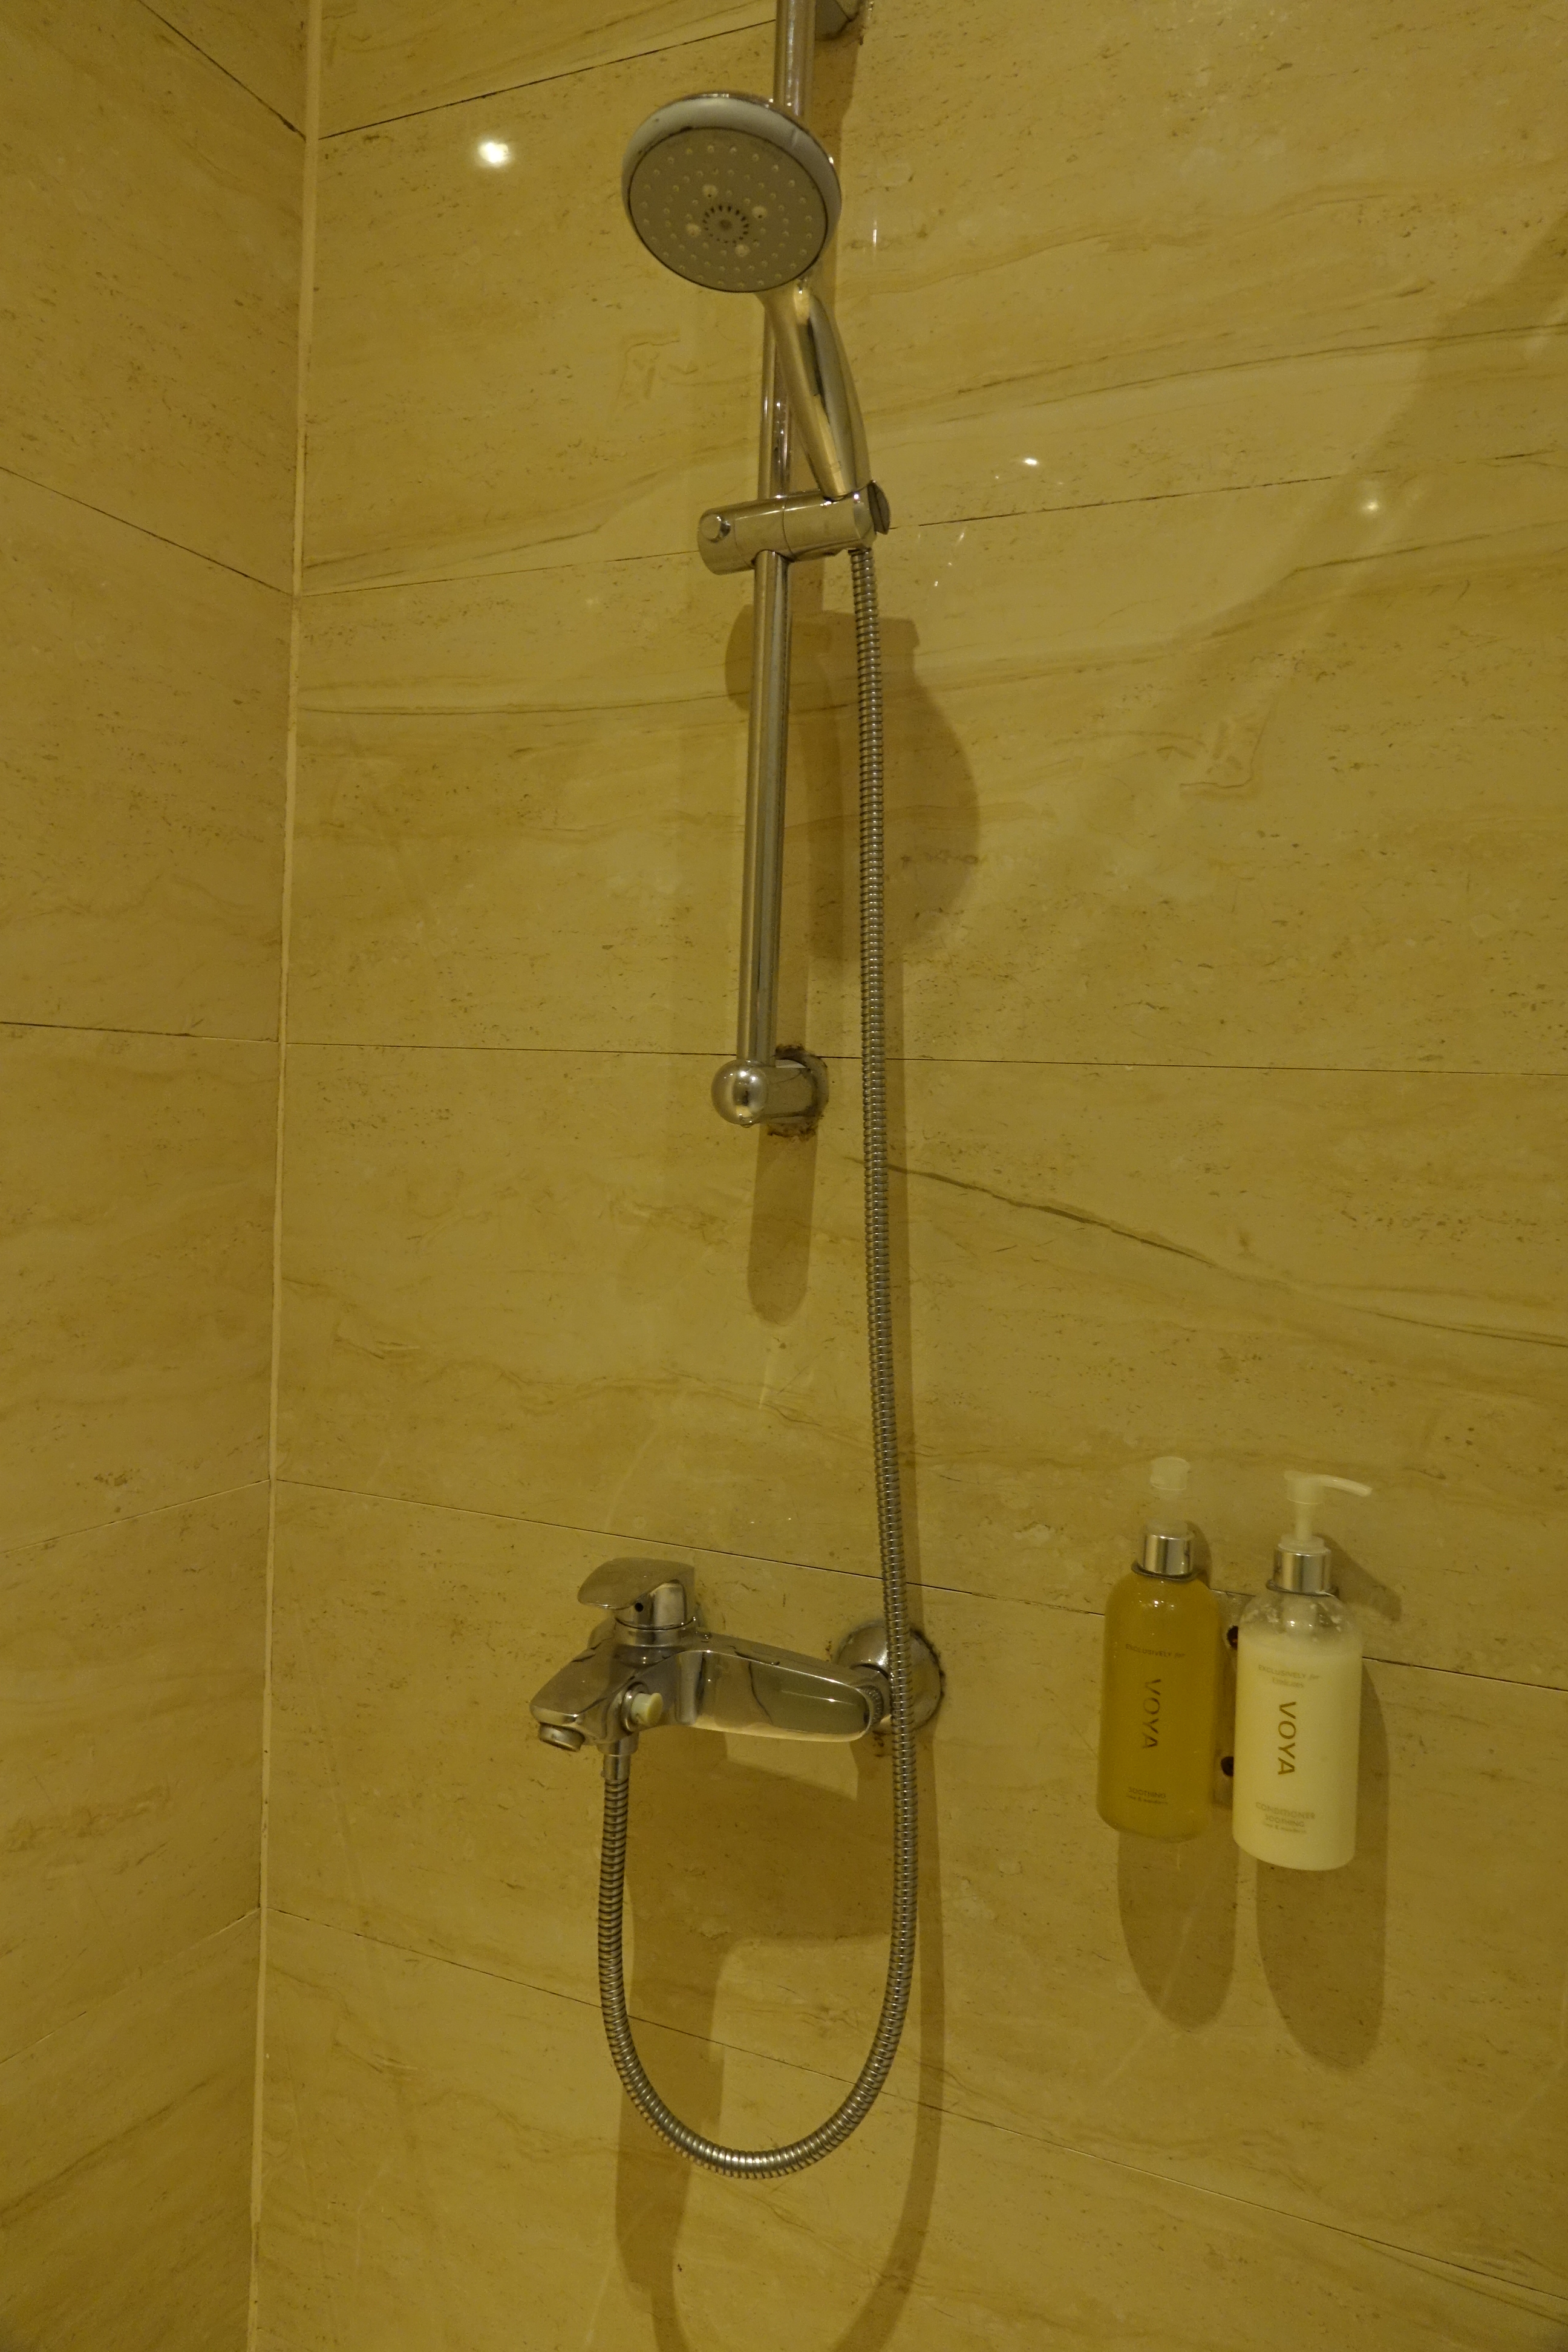 a shower head with a hose and soaps on the wall